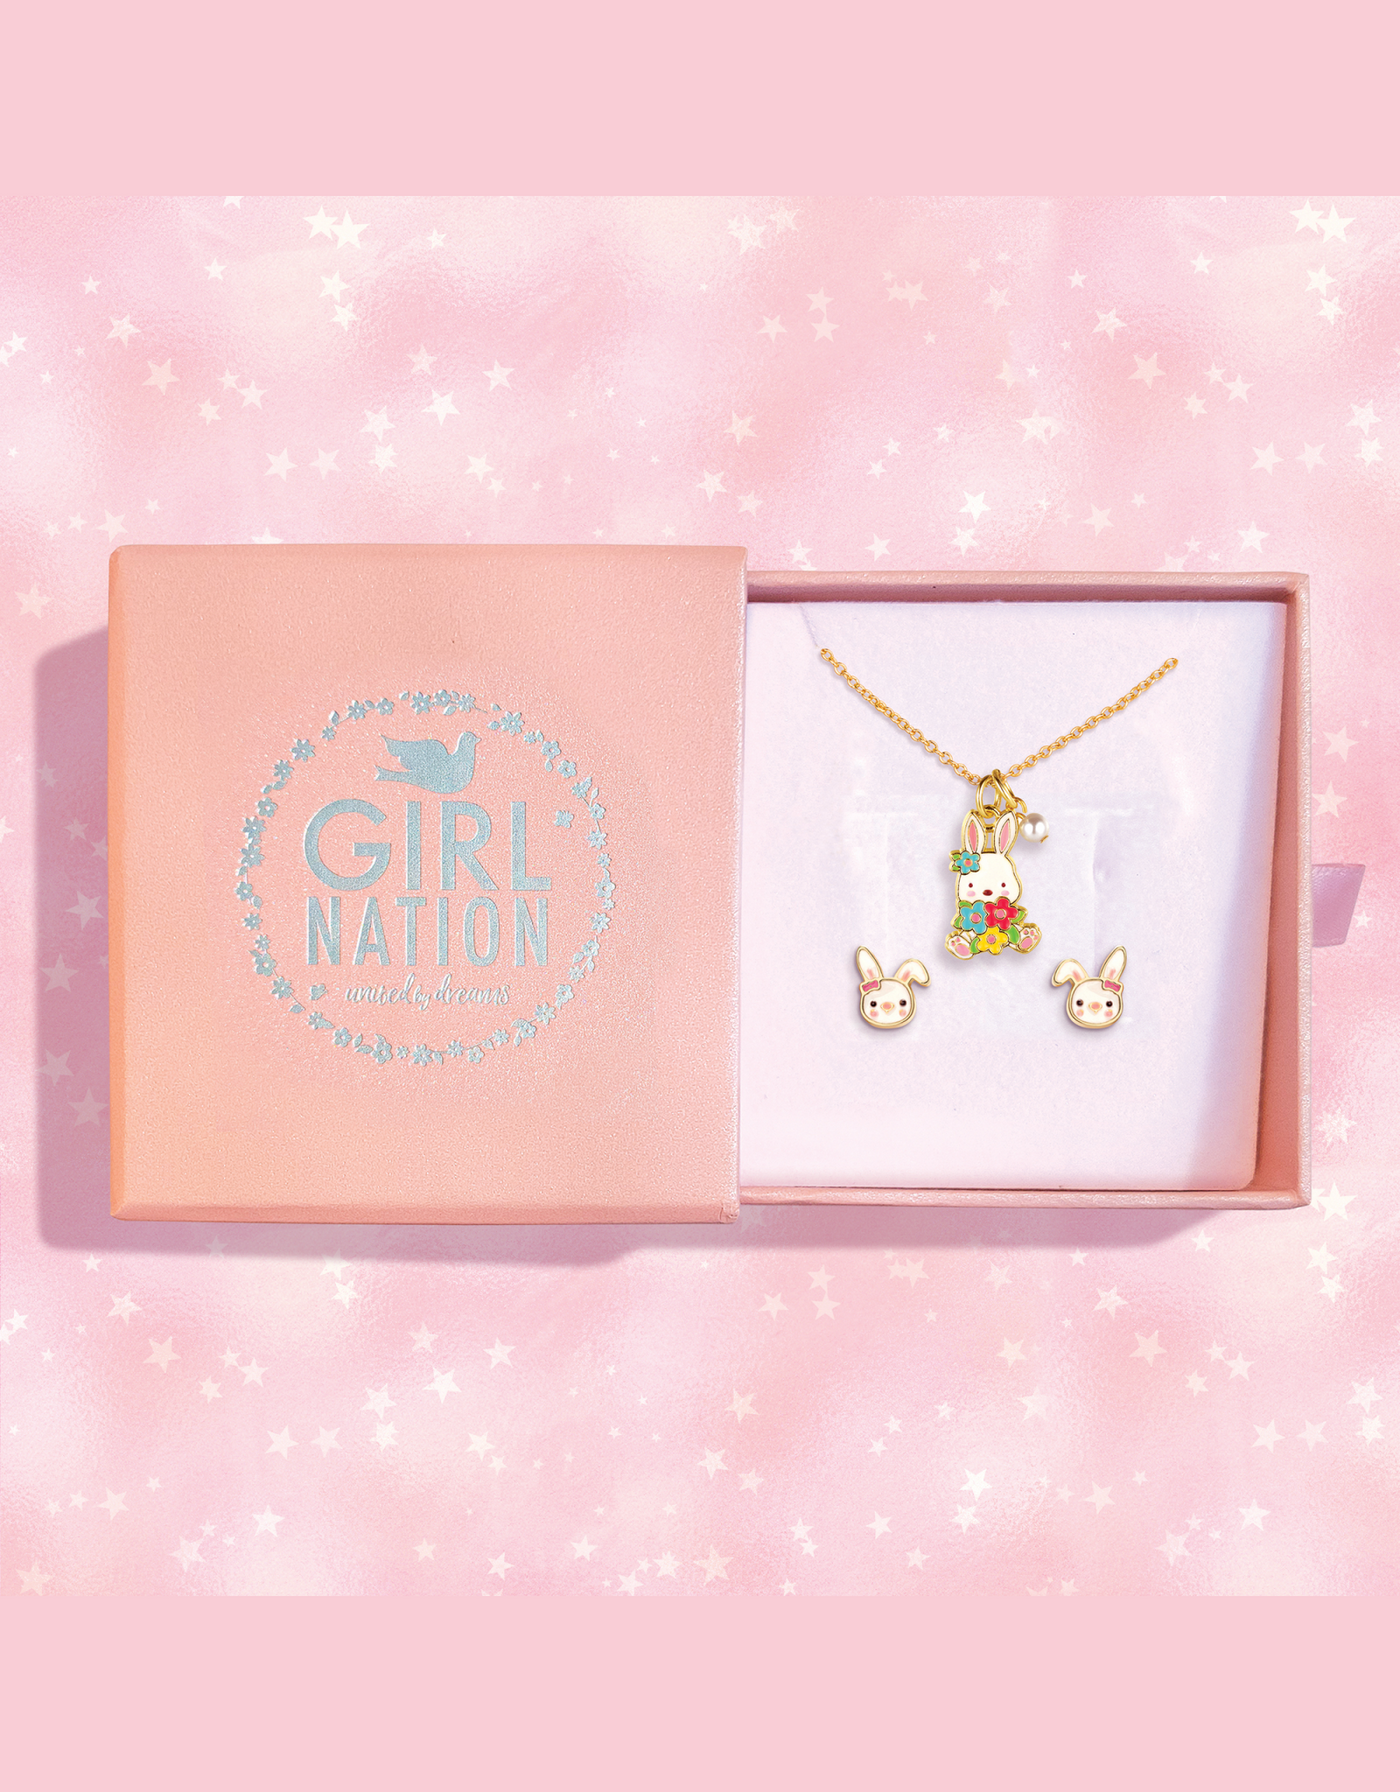 Fantasy necklace and earrings gift set - Bunny and flowers - Girl Nation